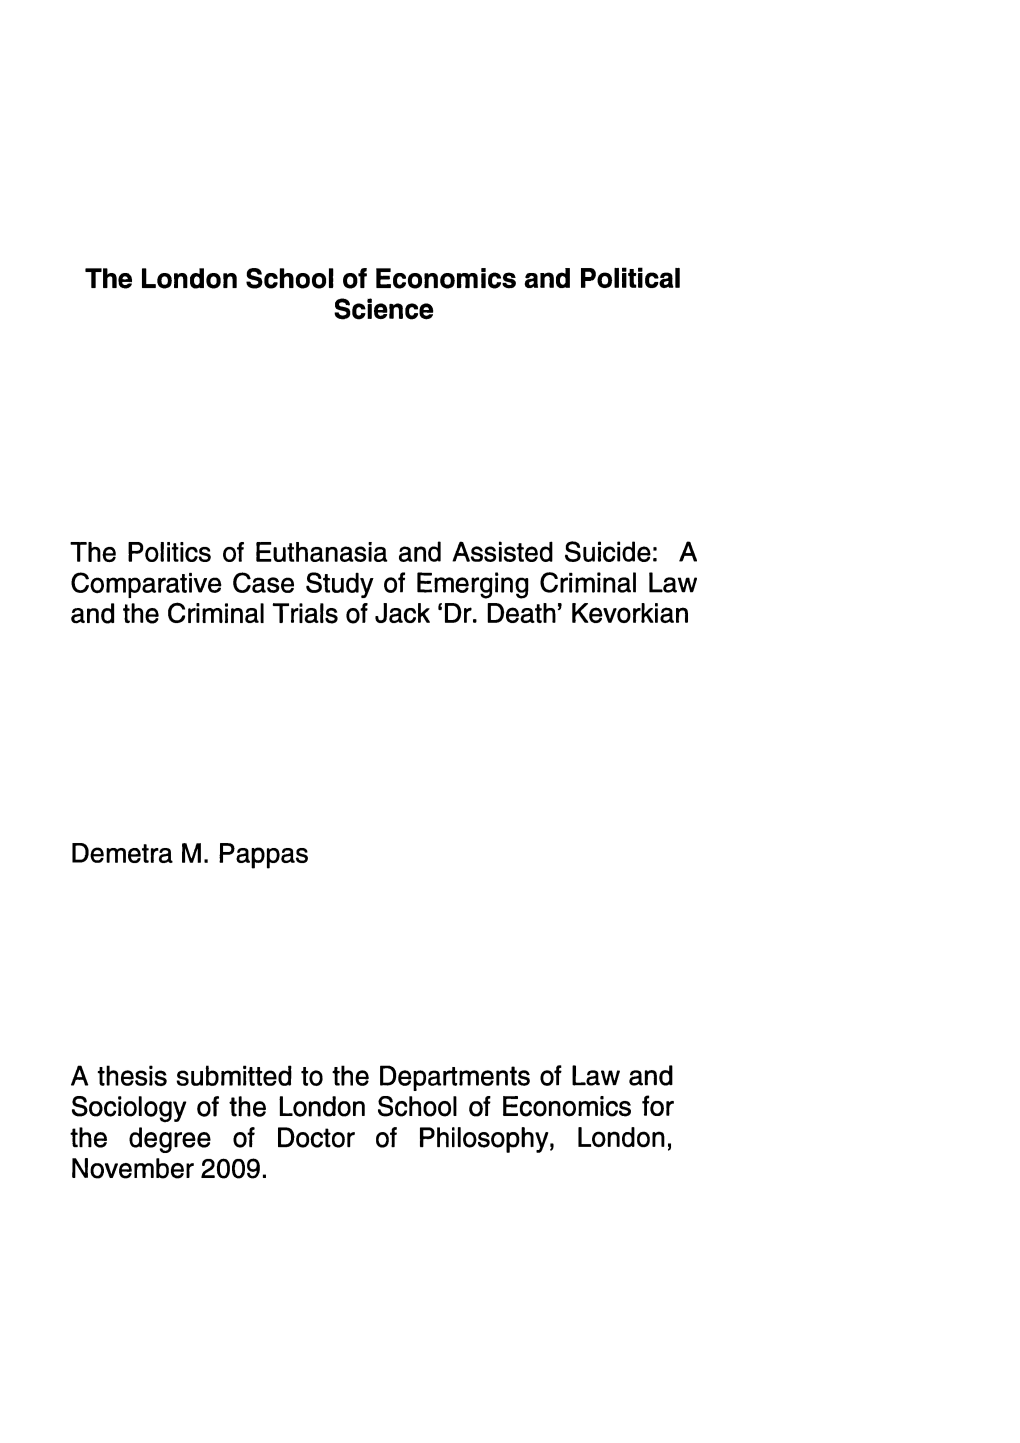 The London School of Economics and Political Science the Politics of Euthanasia and Assisted Suicide